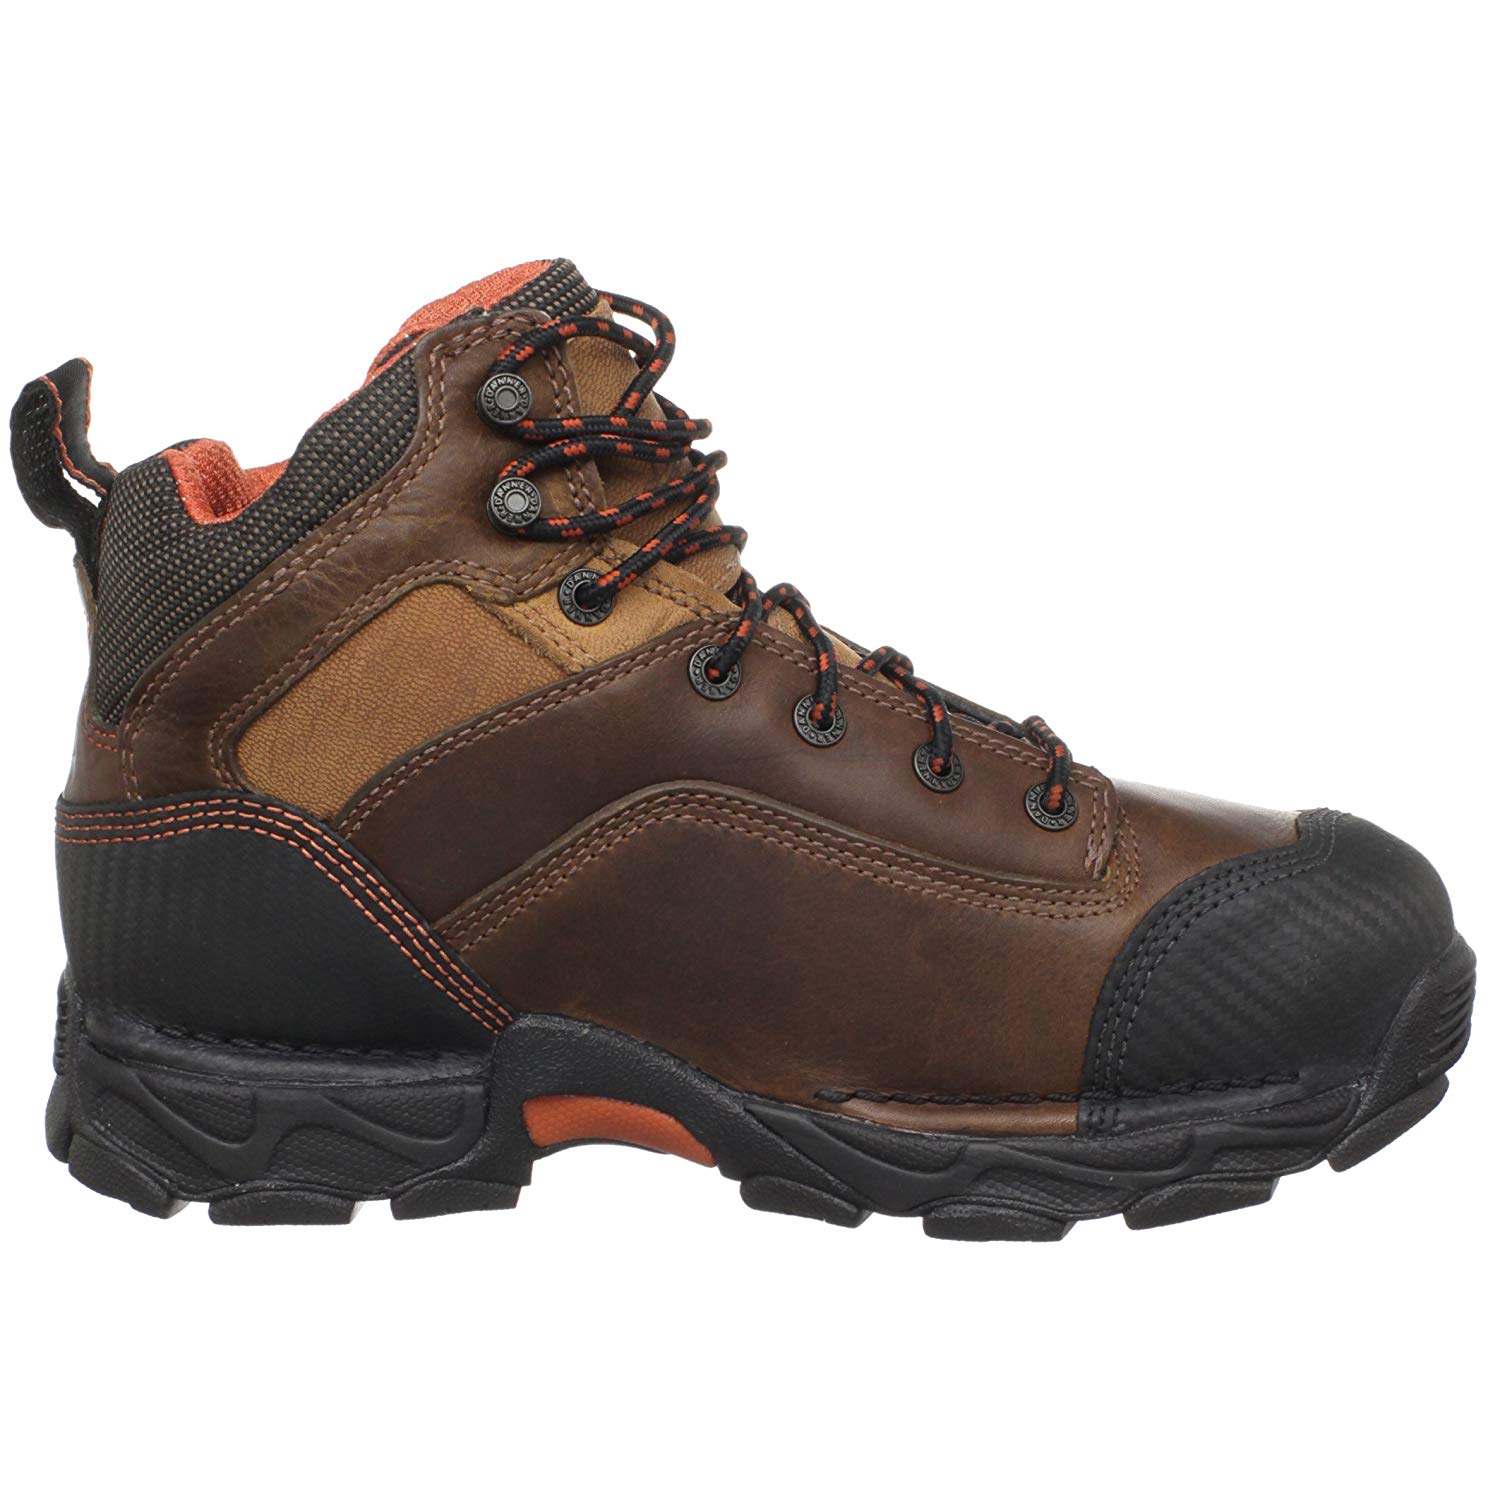 Danner Mens Corvallis 5 Leather Cap Toe Ankle Safety Boots, Brown, Size ...